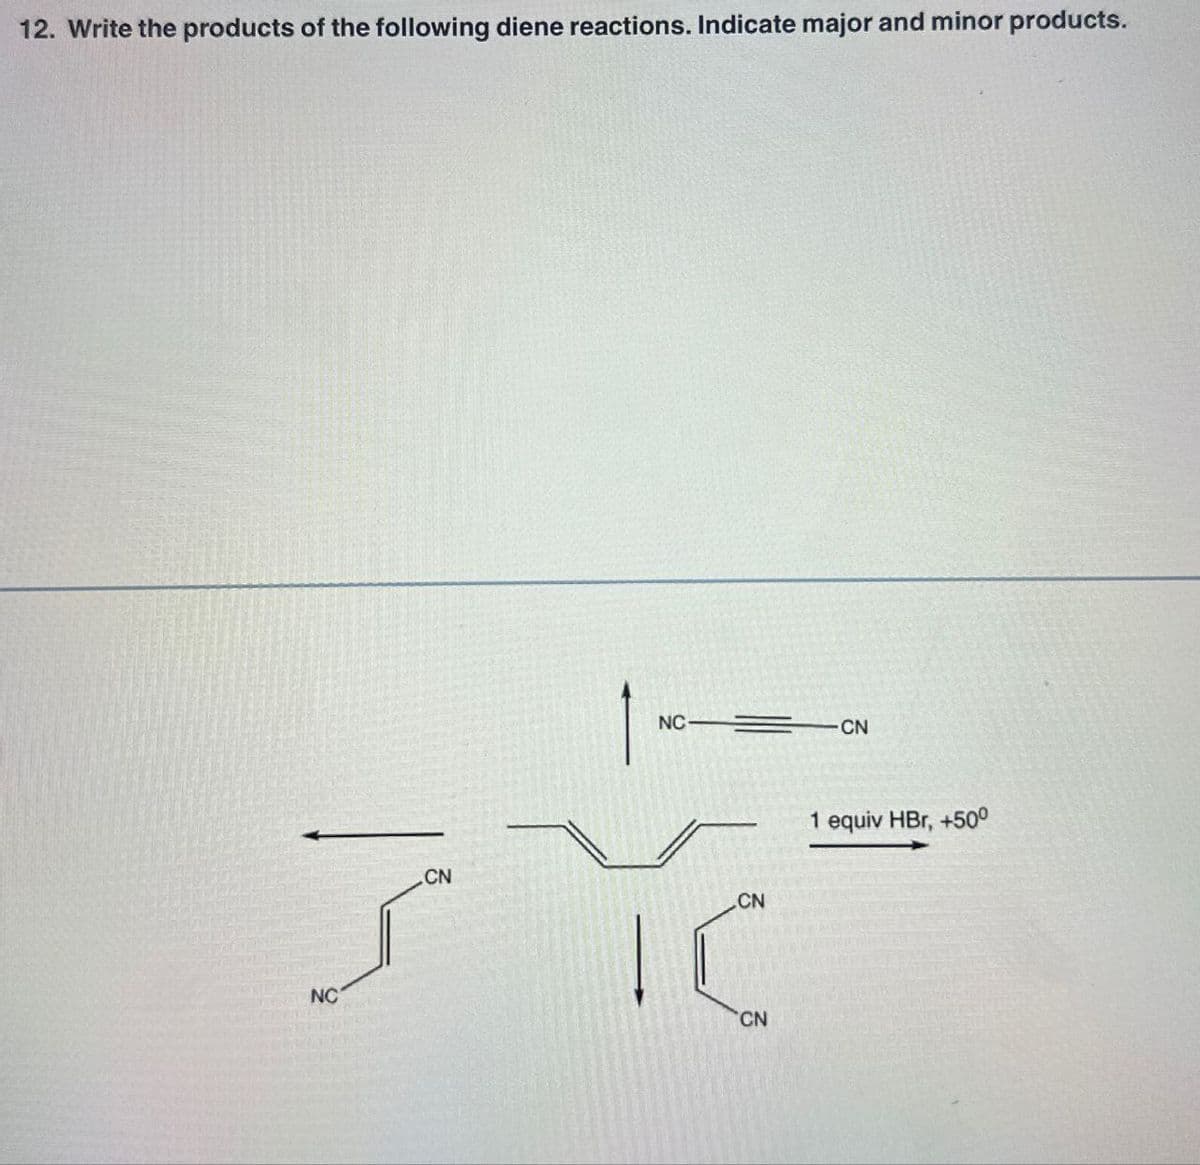 12. Write the products of the following diene reactions. Indicate major and minor products.
NC
NC
CN
CN
CN
CN
1 equiv HBr, +50°